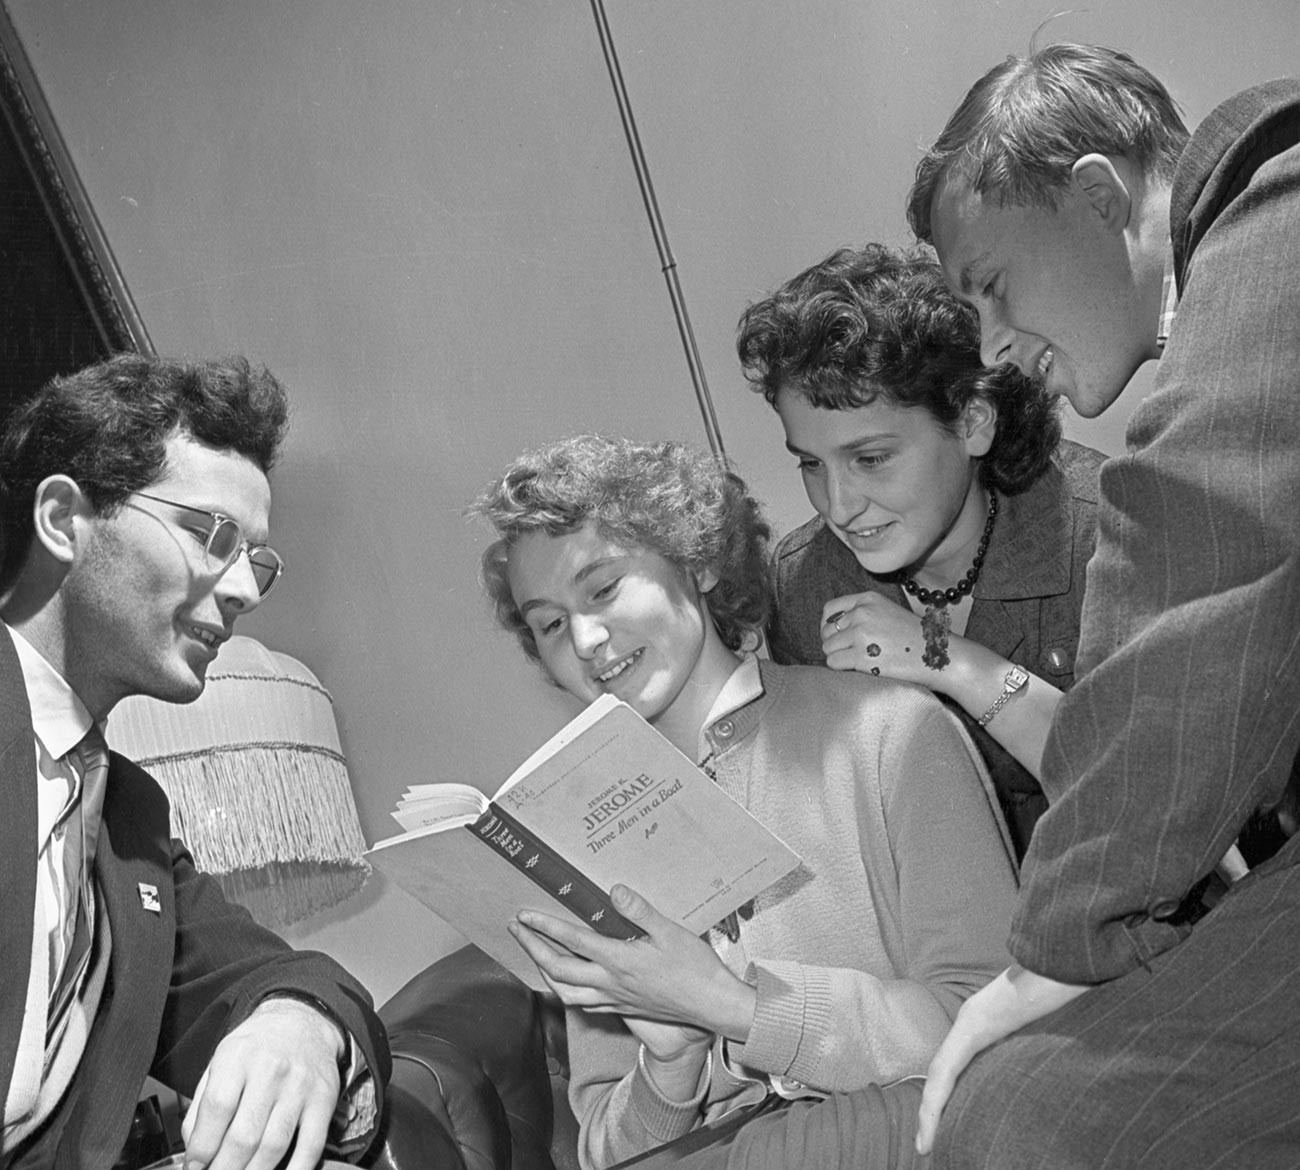 A group of Moscow students in 1958.